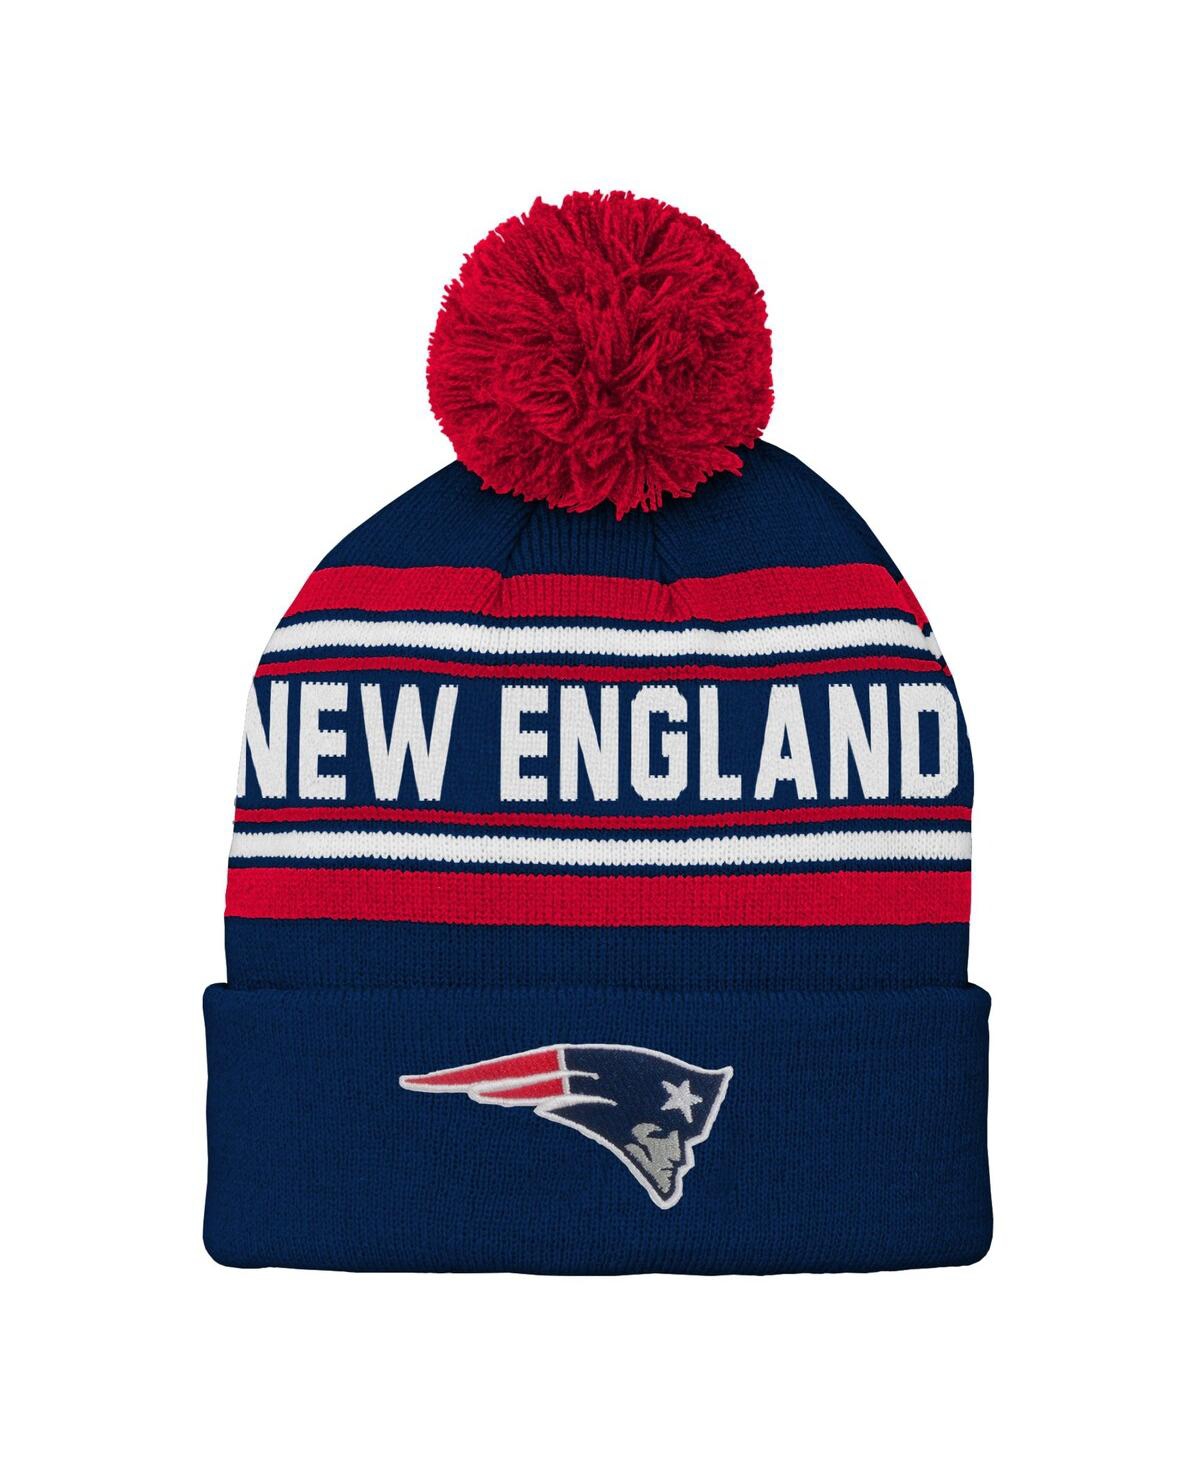 Outerstuff Kids' Youth Boys And Girls Navy New England Patriots Jacquard Cuffed Knit Hat With Pom